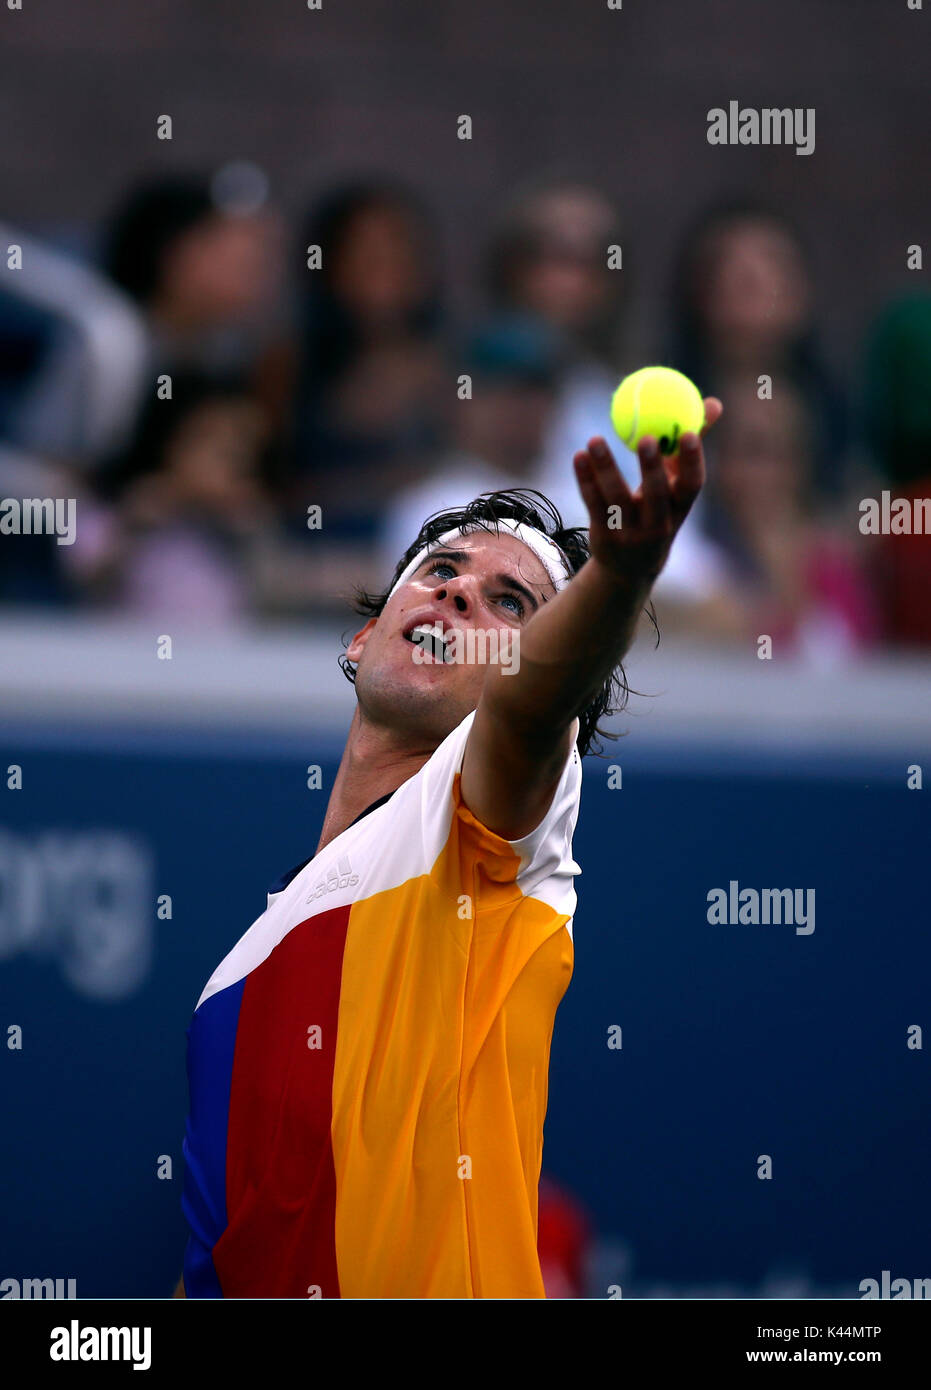 Flushing Meadows, New York, USA. 4th Sep, 2017. US Open Tennis: number 6 seeded Dominic Thiem of Austria serves during his fourth round match against Juan Martin del Potro of Argentina at the US Open in Flushing Meadows, New York. del Potro won the match in five sets to advance to the quarterfinals. Credit: Adam Stoltman/Alamy Live News Stock Photo